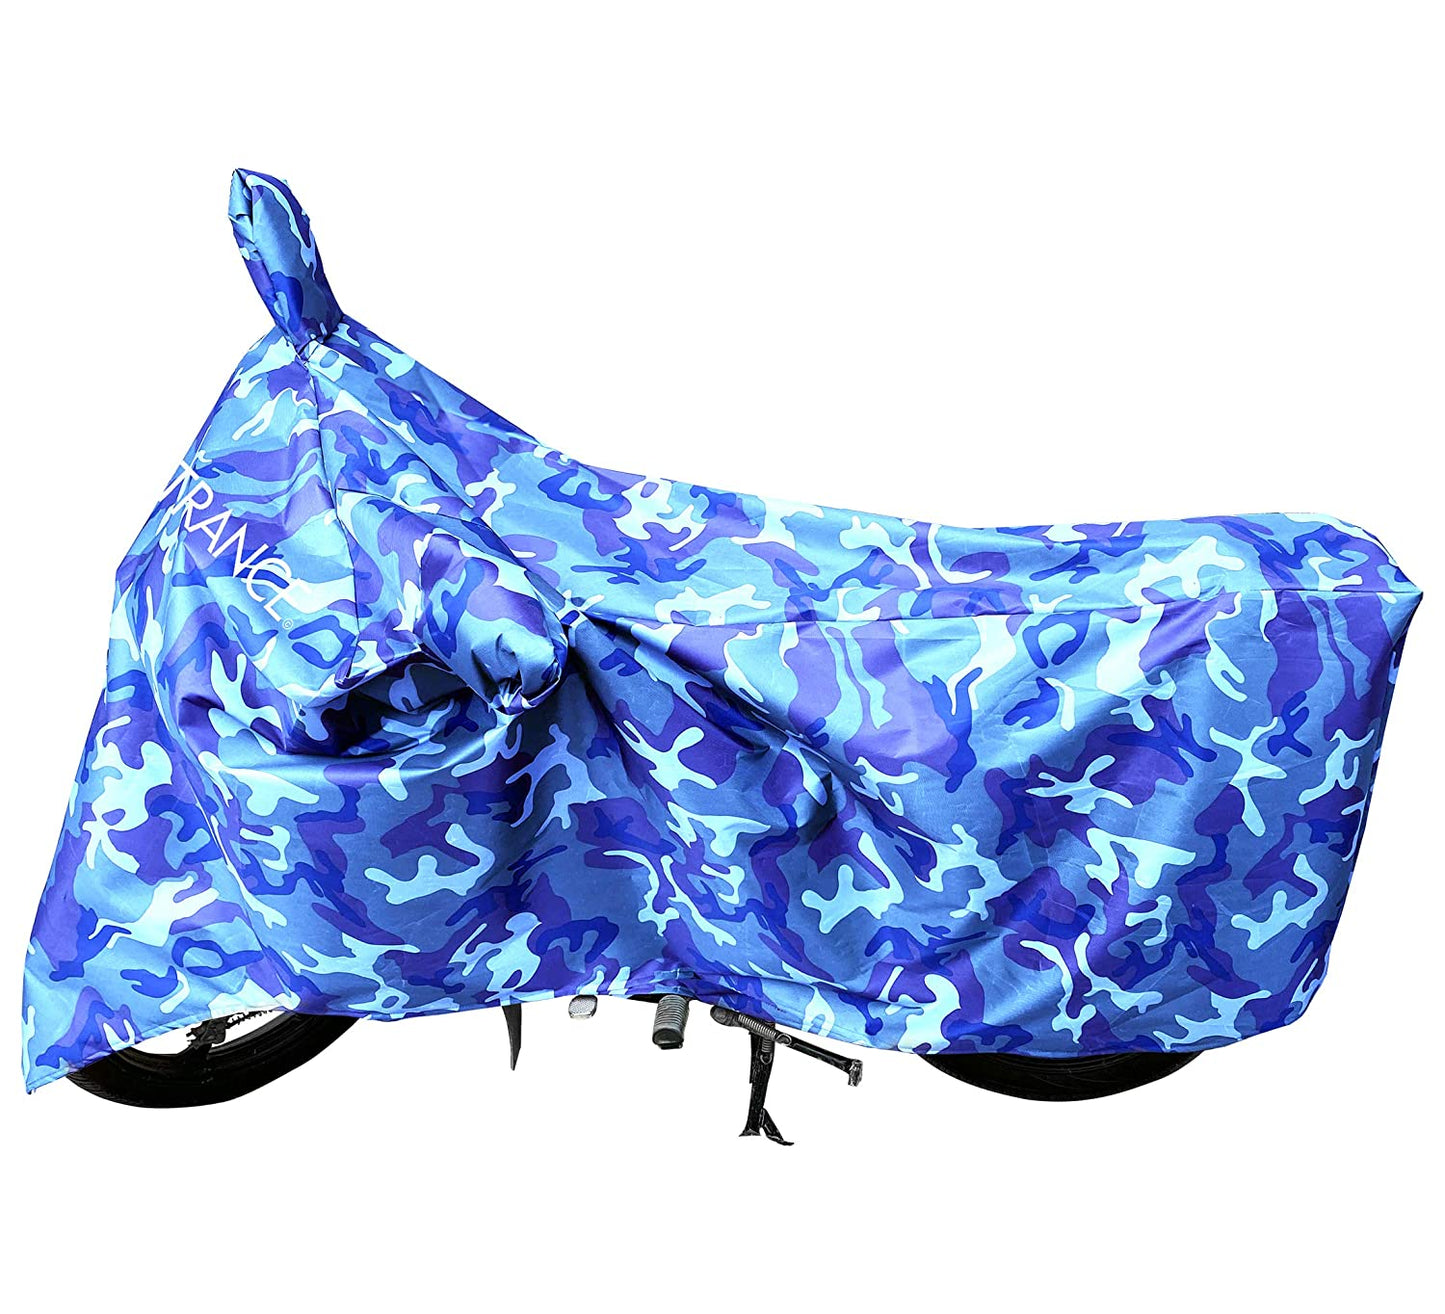 MotoTrance Jungle Bike Body Covers For Honda Navi - Interlock-Stitched Waterproof and Heat Resistant with Mirror Pockets